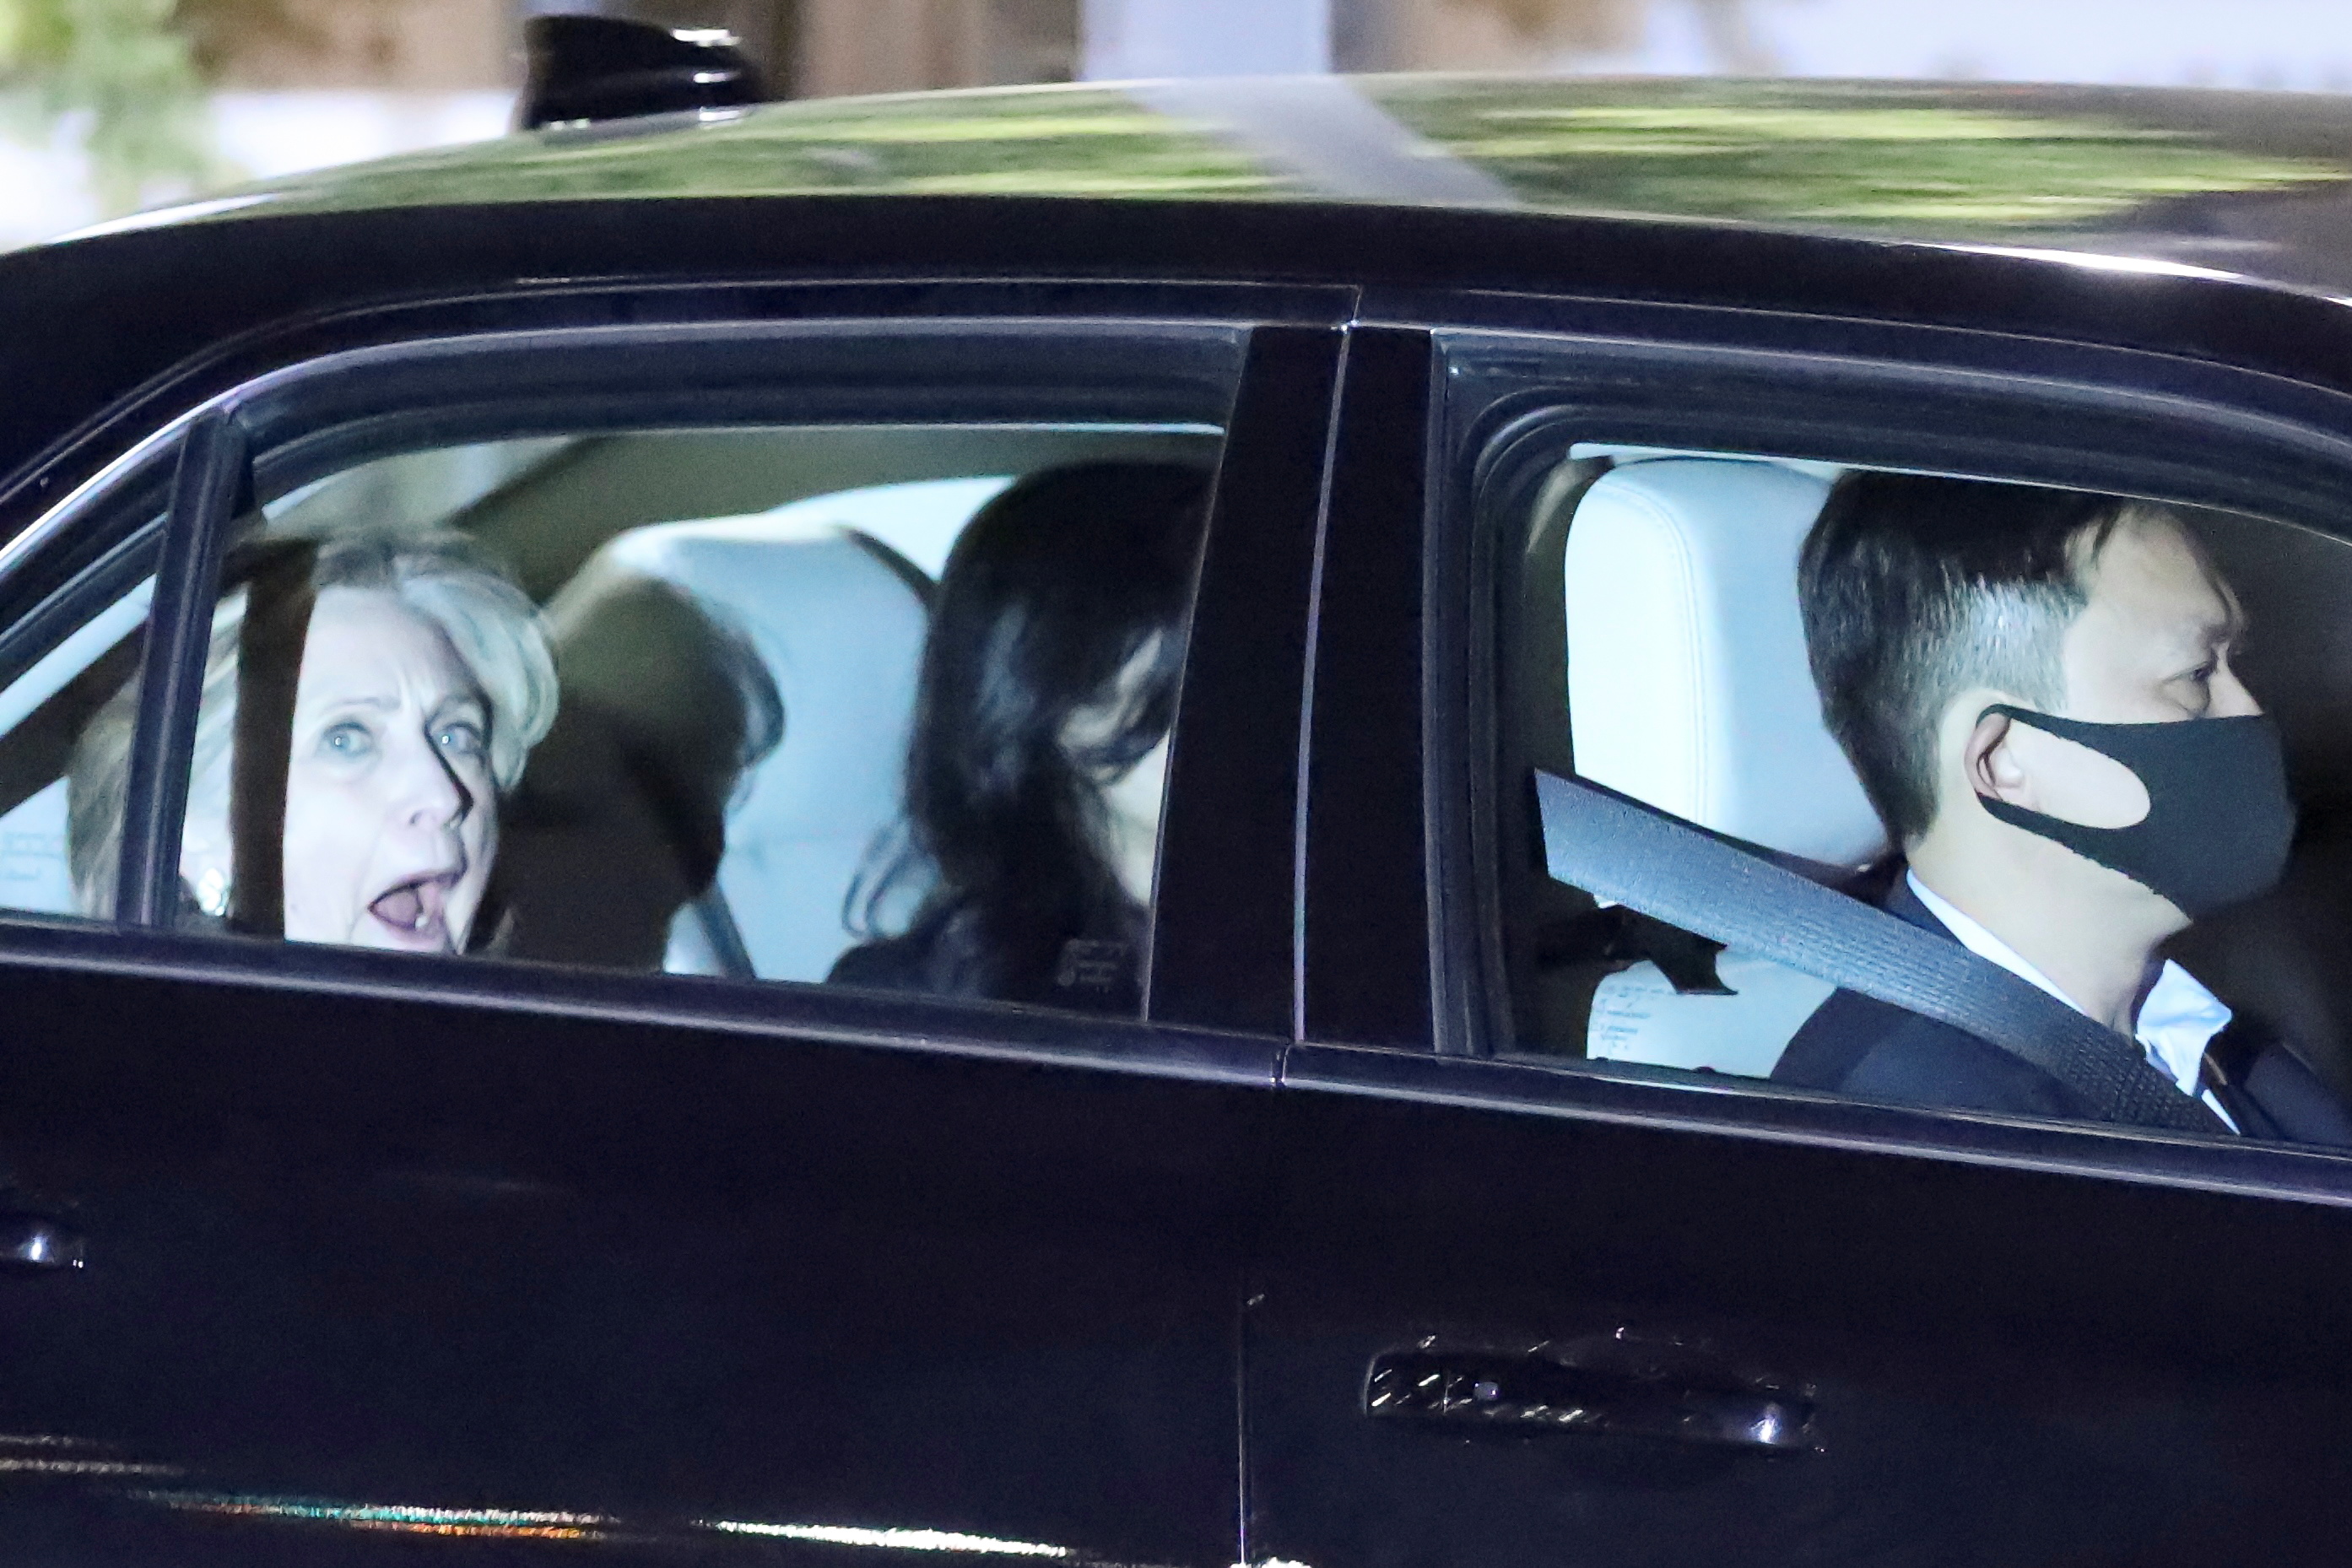 Hillary Clinton leaves in a car after it was announced that former U.S. President Bill Clinton was admitted to the University of California Irvine Medical Center in Orange